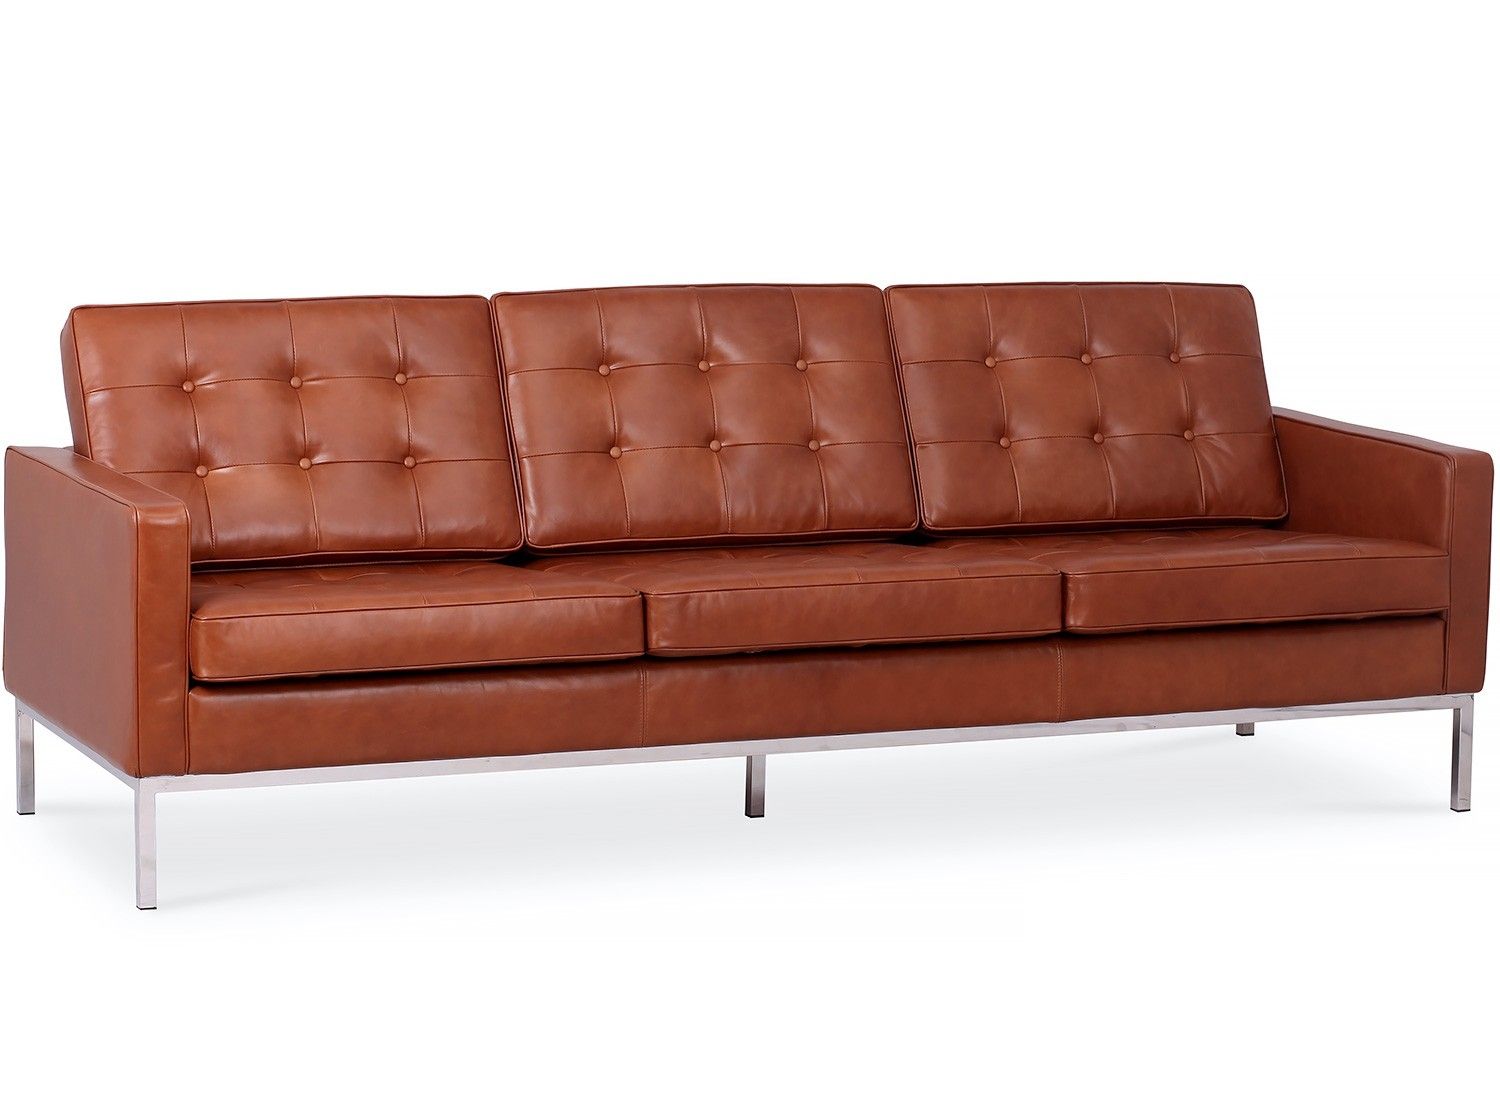 Florence Knoll Sofa 3 Seater Leather Platinum Replica Throughout Florence Knoll 3 Seater Sofas (View 11 of 15)